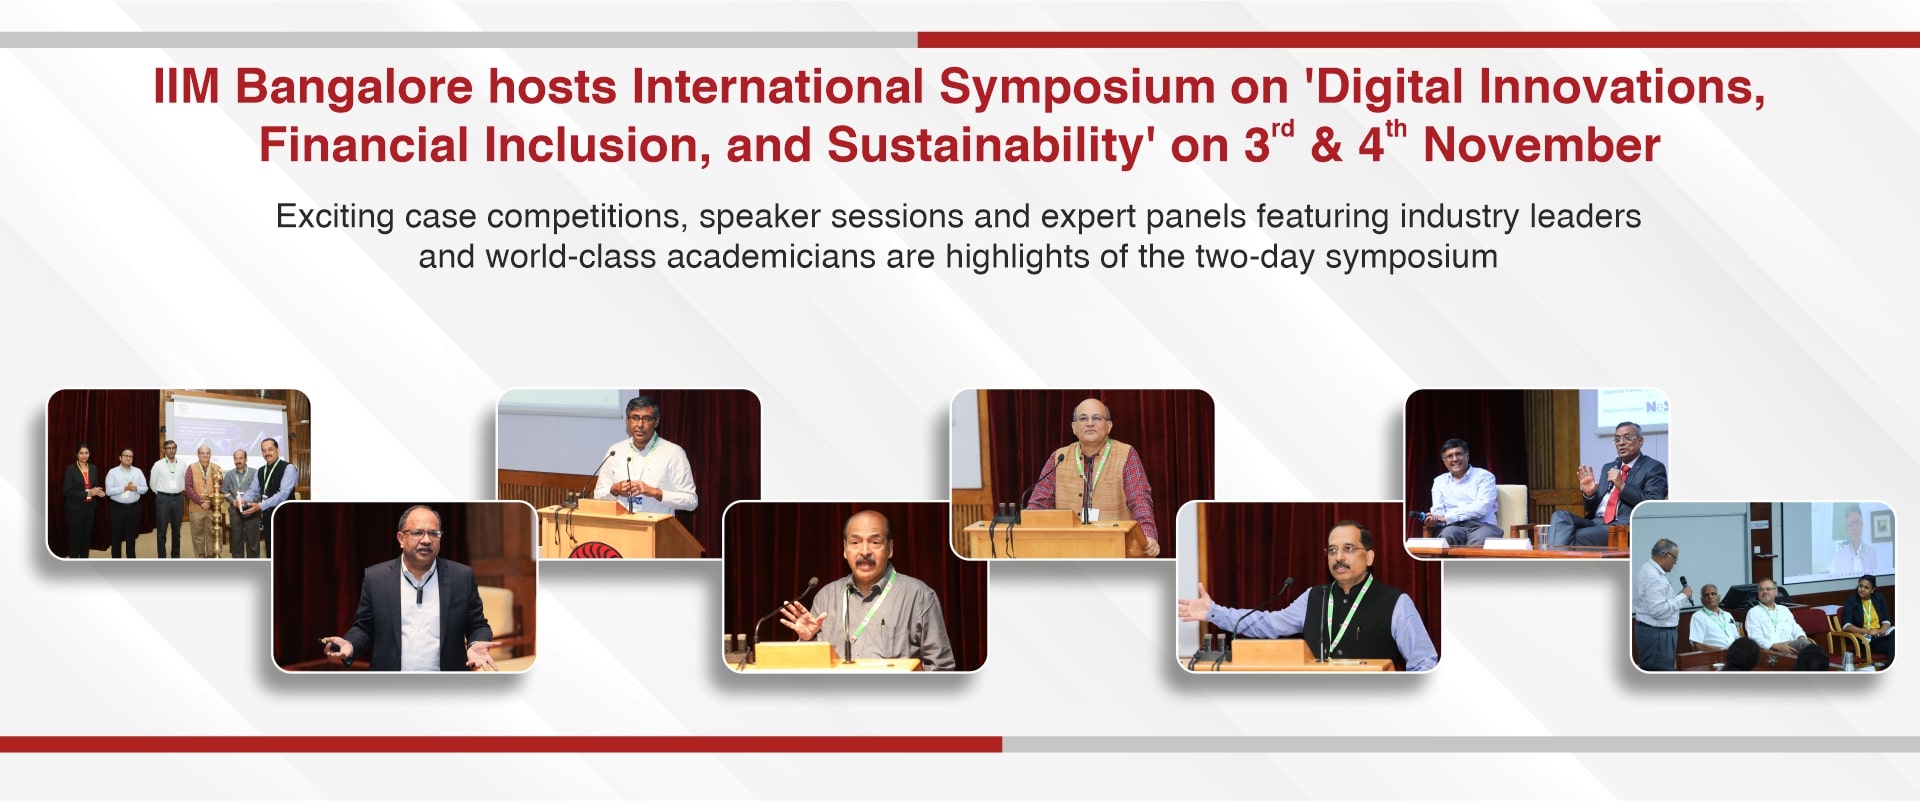 IIM Bangalore hosts international symposium on ‘Digital Innovations, Financial Inclusion, and Sustainability’ on 3rd and 4th Nov